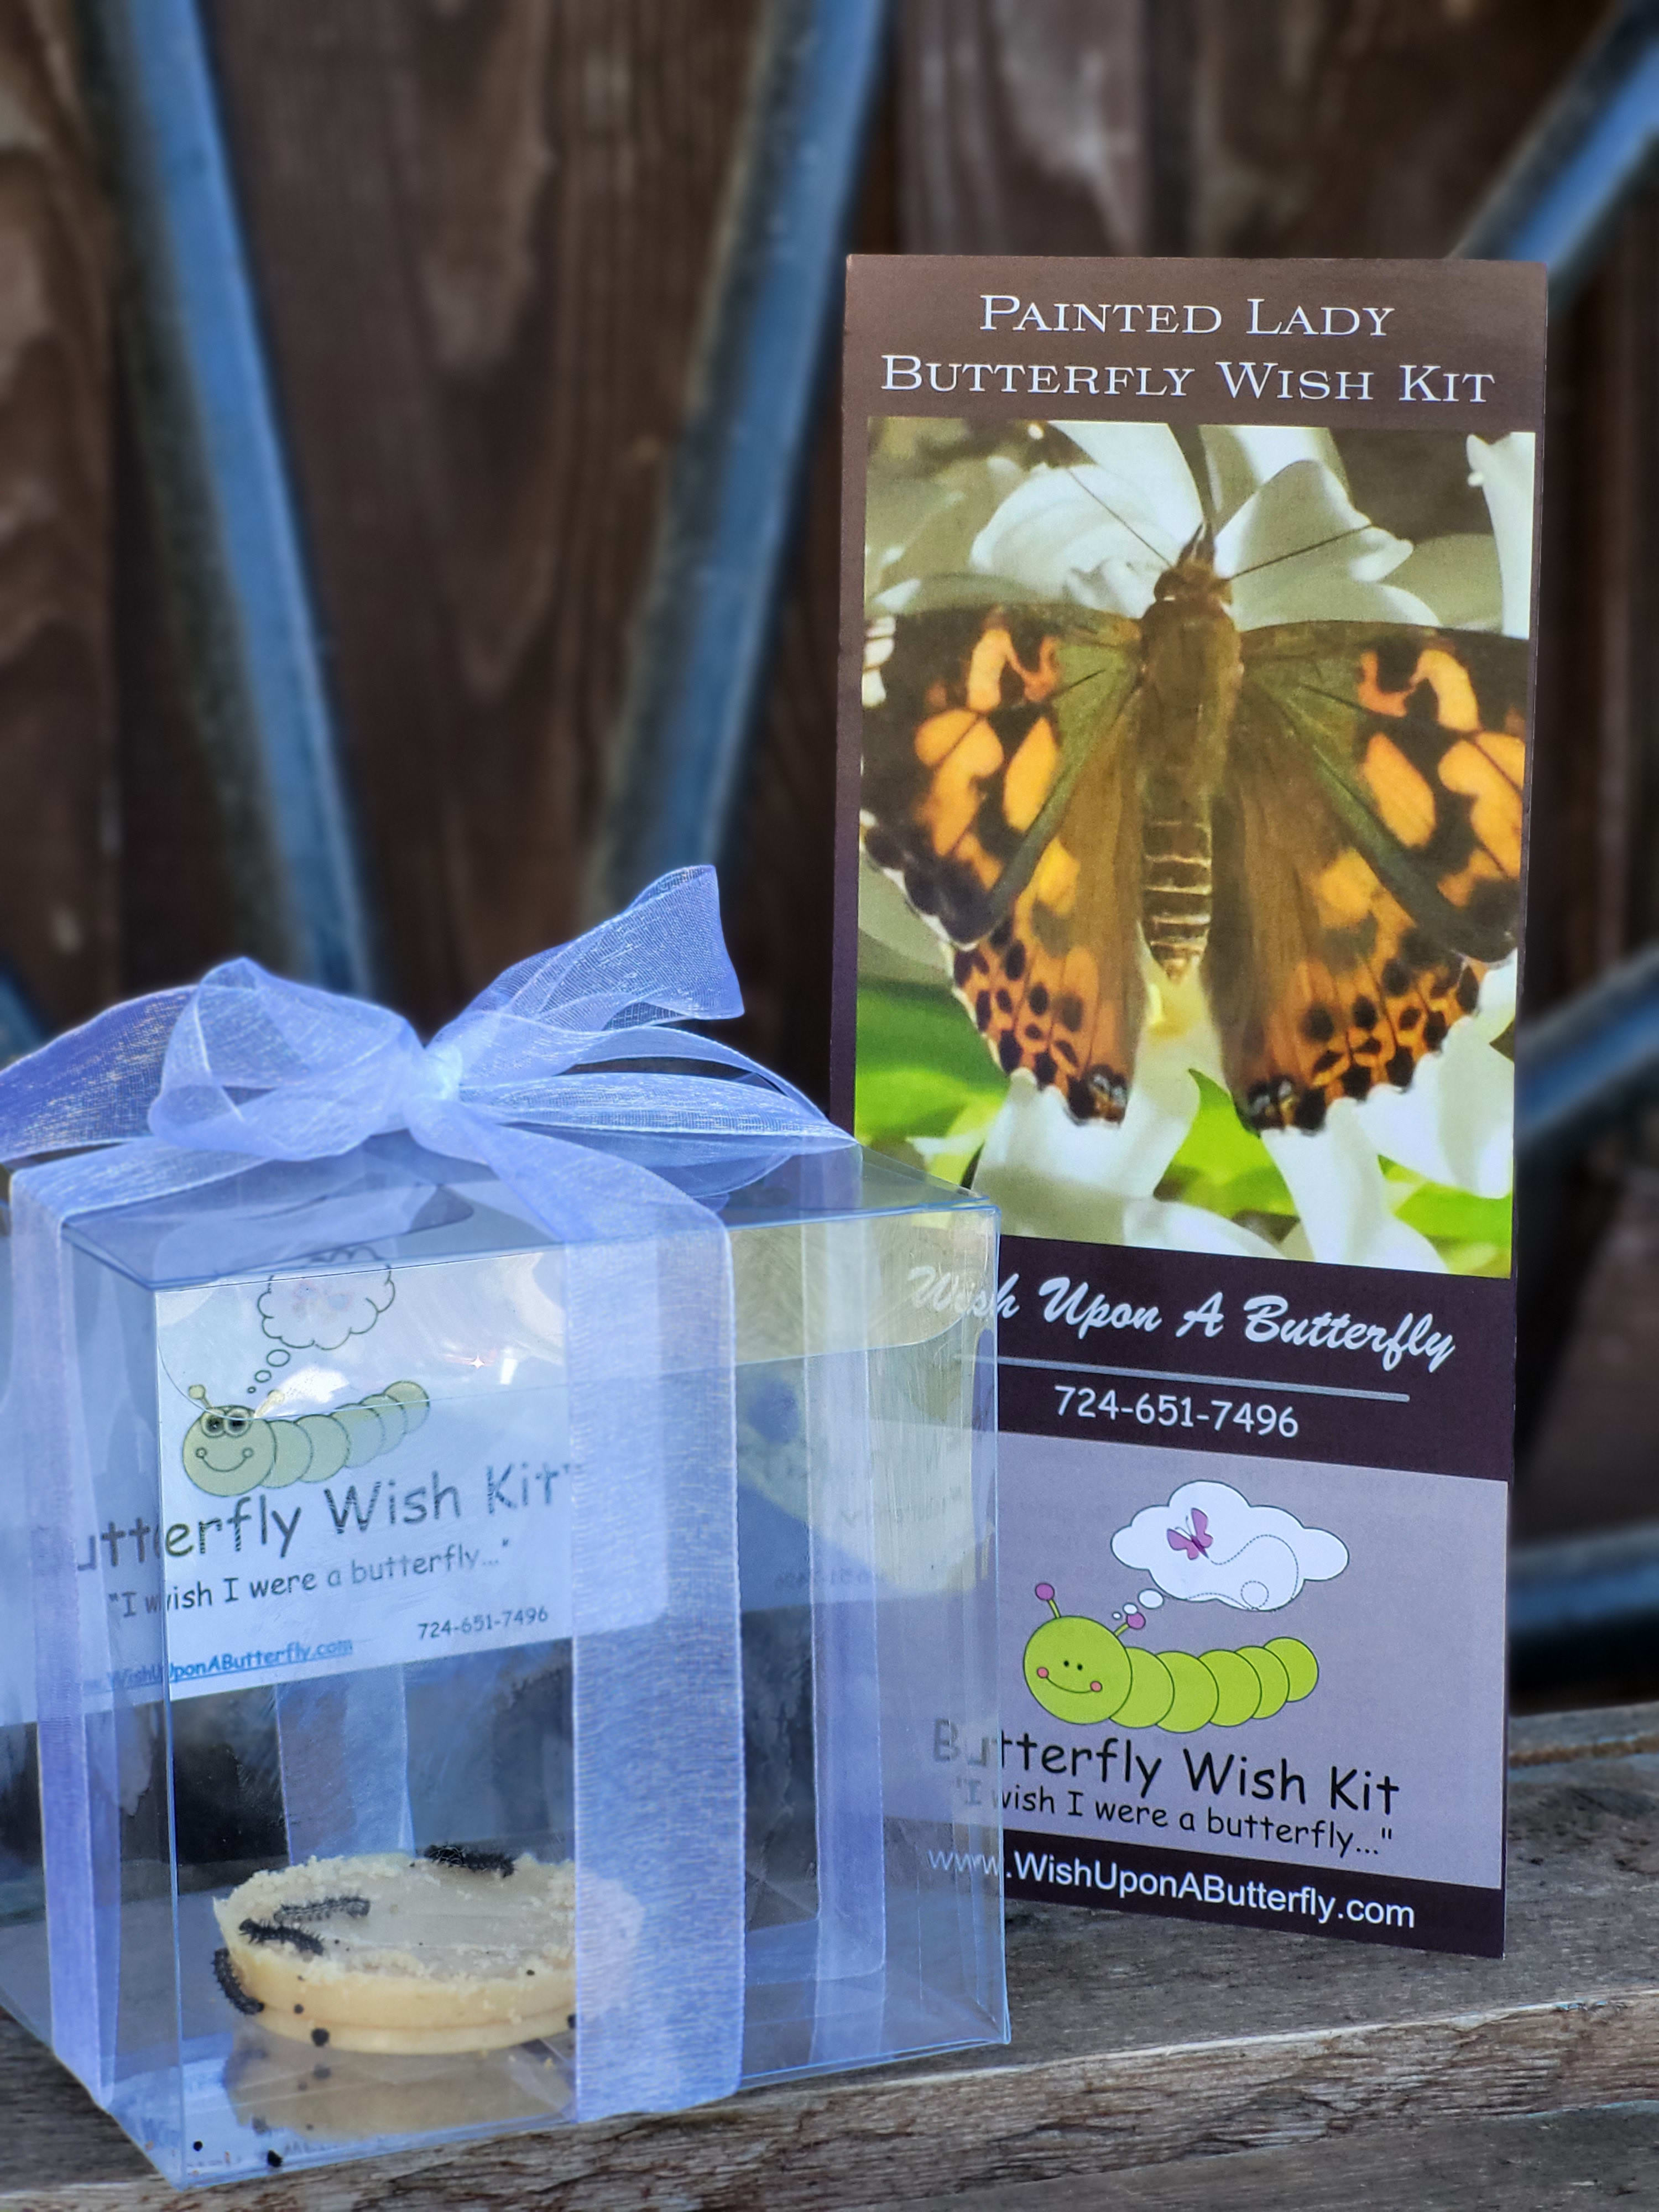 Butterfly Wish Kit - A Painted Lady Caterpillar Kit - Everything you need to watch the caterpillars grow and transform into butterflies! Experience the butterfly life cycle in your own home! Kits include 3-4 caterpillars, food for caterpillar, instructions and an adoption certificate. You will have live butterflies to release in about 3 weeks from the date you receive the kit!